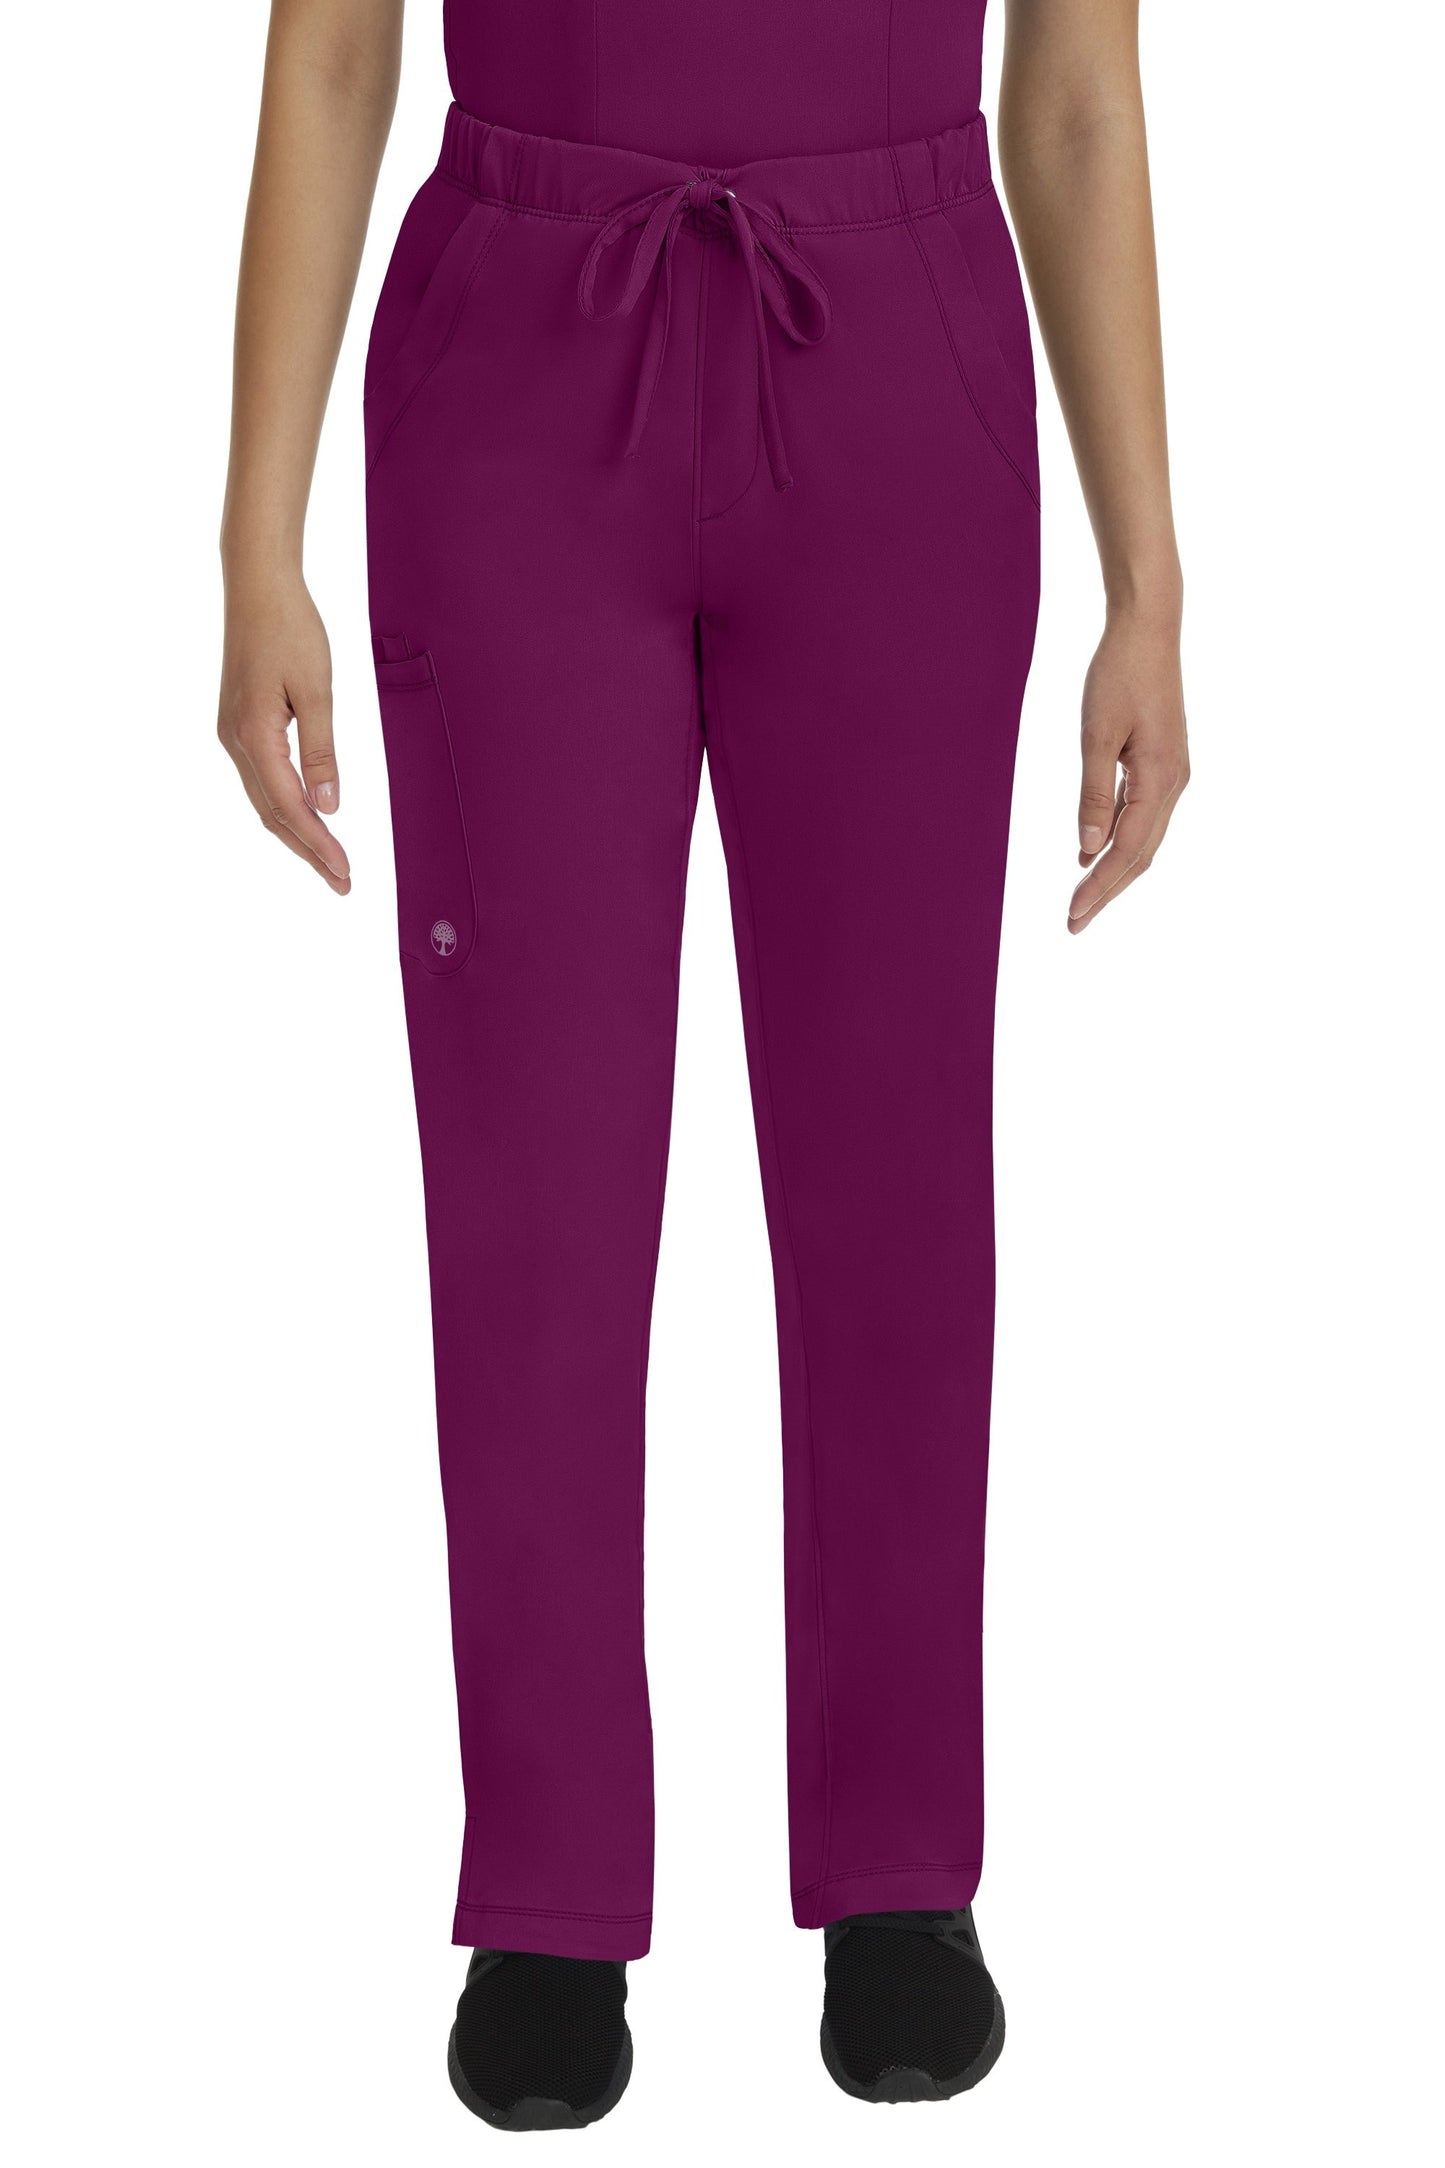 Healing Hands Scrubs HH Works Rebecca Petite Scrub Pant in Wine at Parker's Clothing and Shoes.